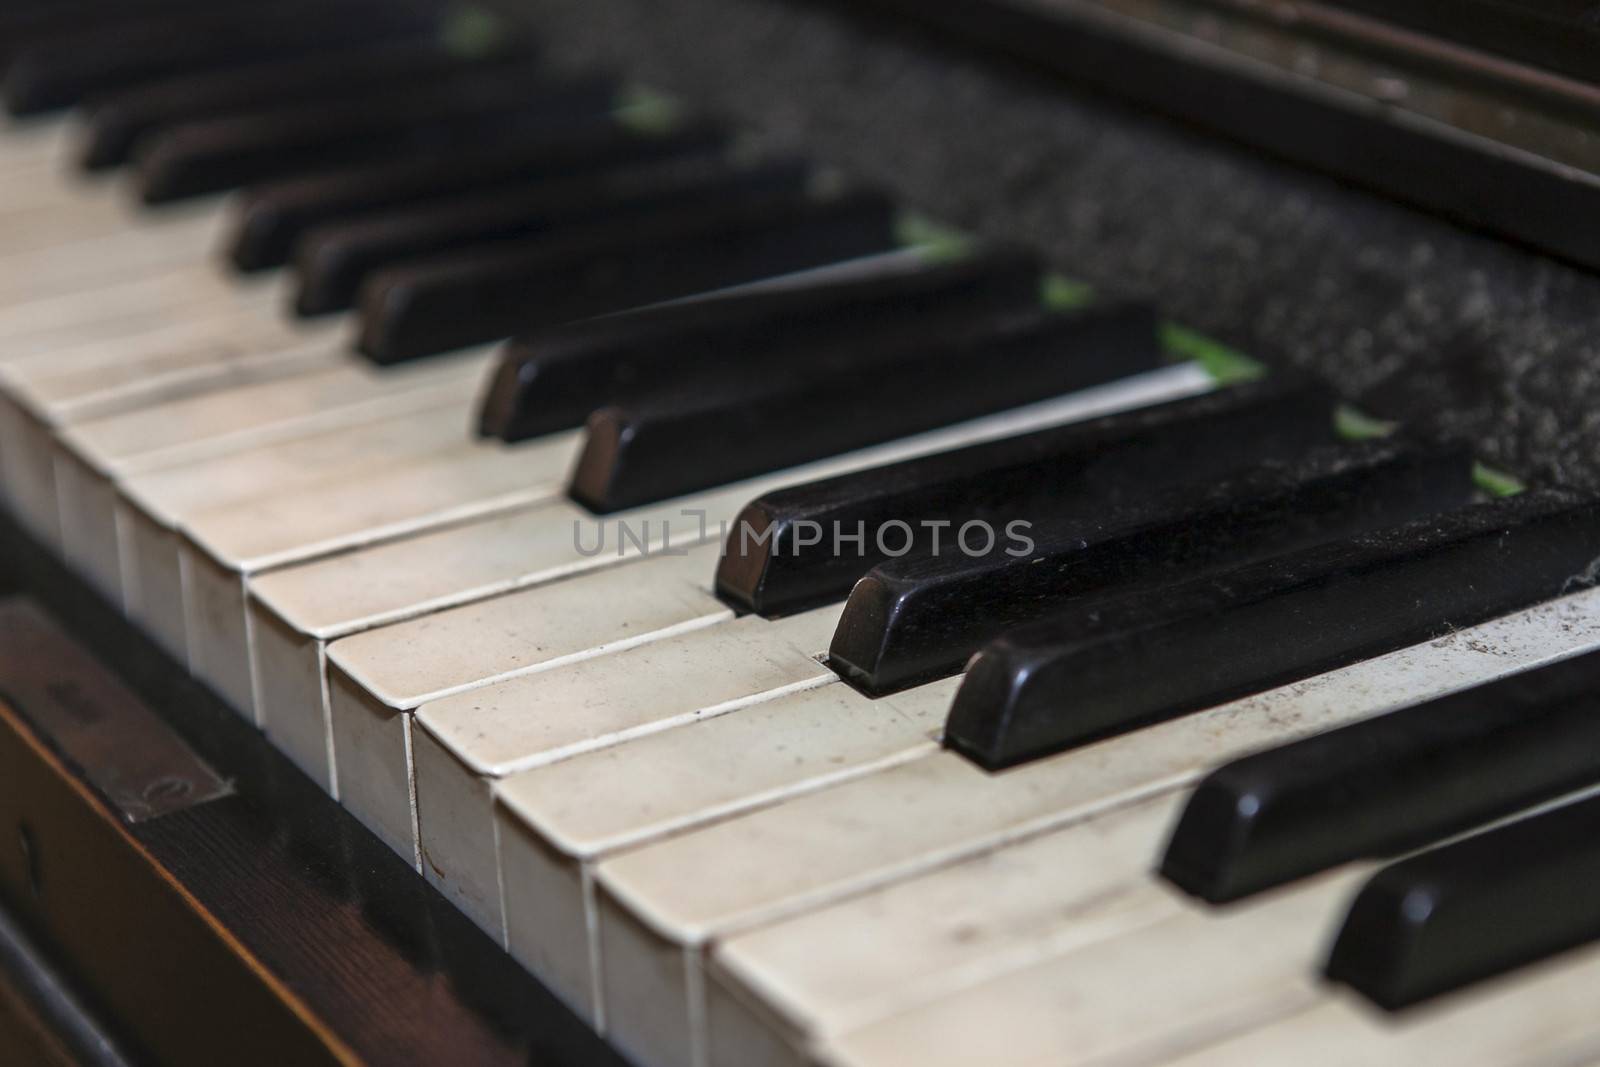 Old Piano Keys by PhotoWorks